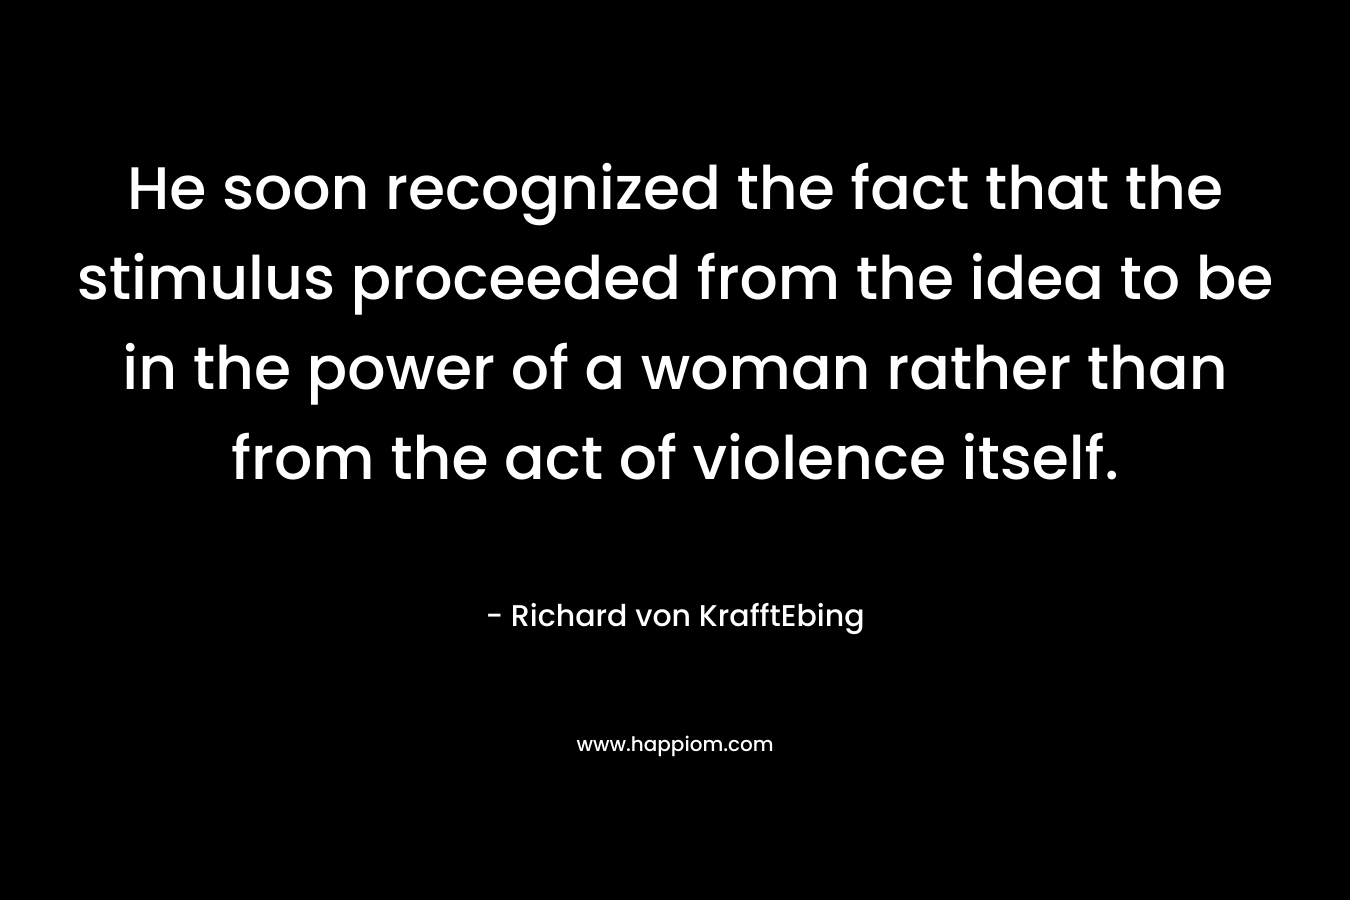 He soon recognized the fact that the stimulus proceeded from the idea to be in the power of a woman rather than from the act of violence itself. – Richard von KrafftEbing